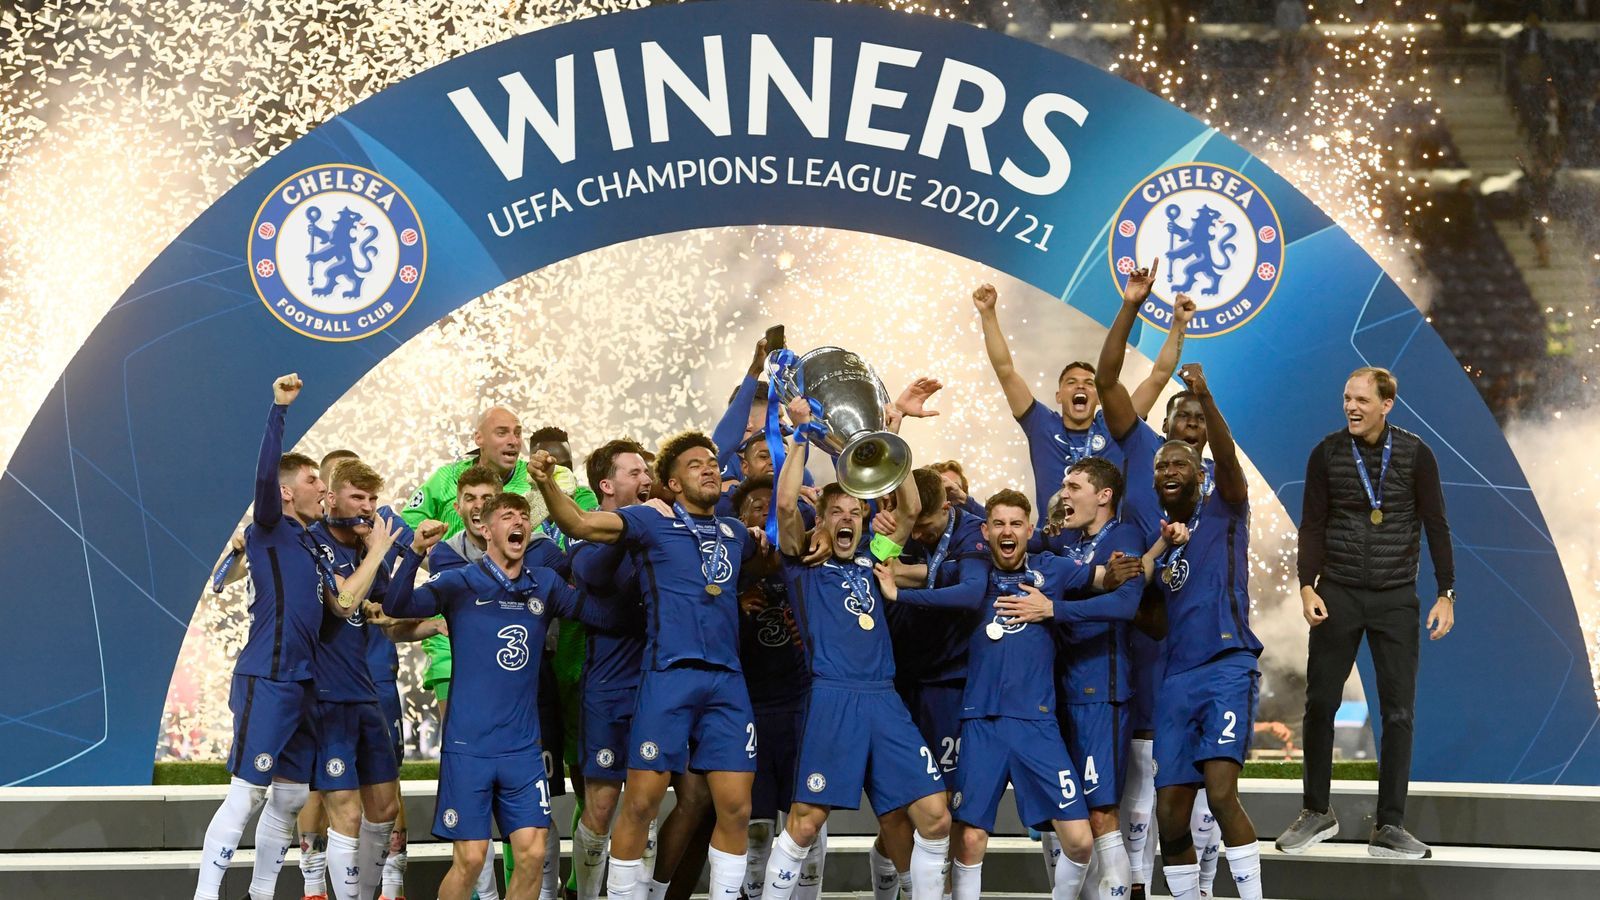 Champions League final: Chelsea crowned winners as they deny Manchester City first major European title